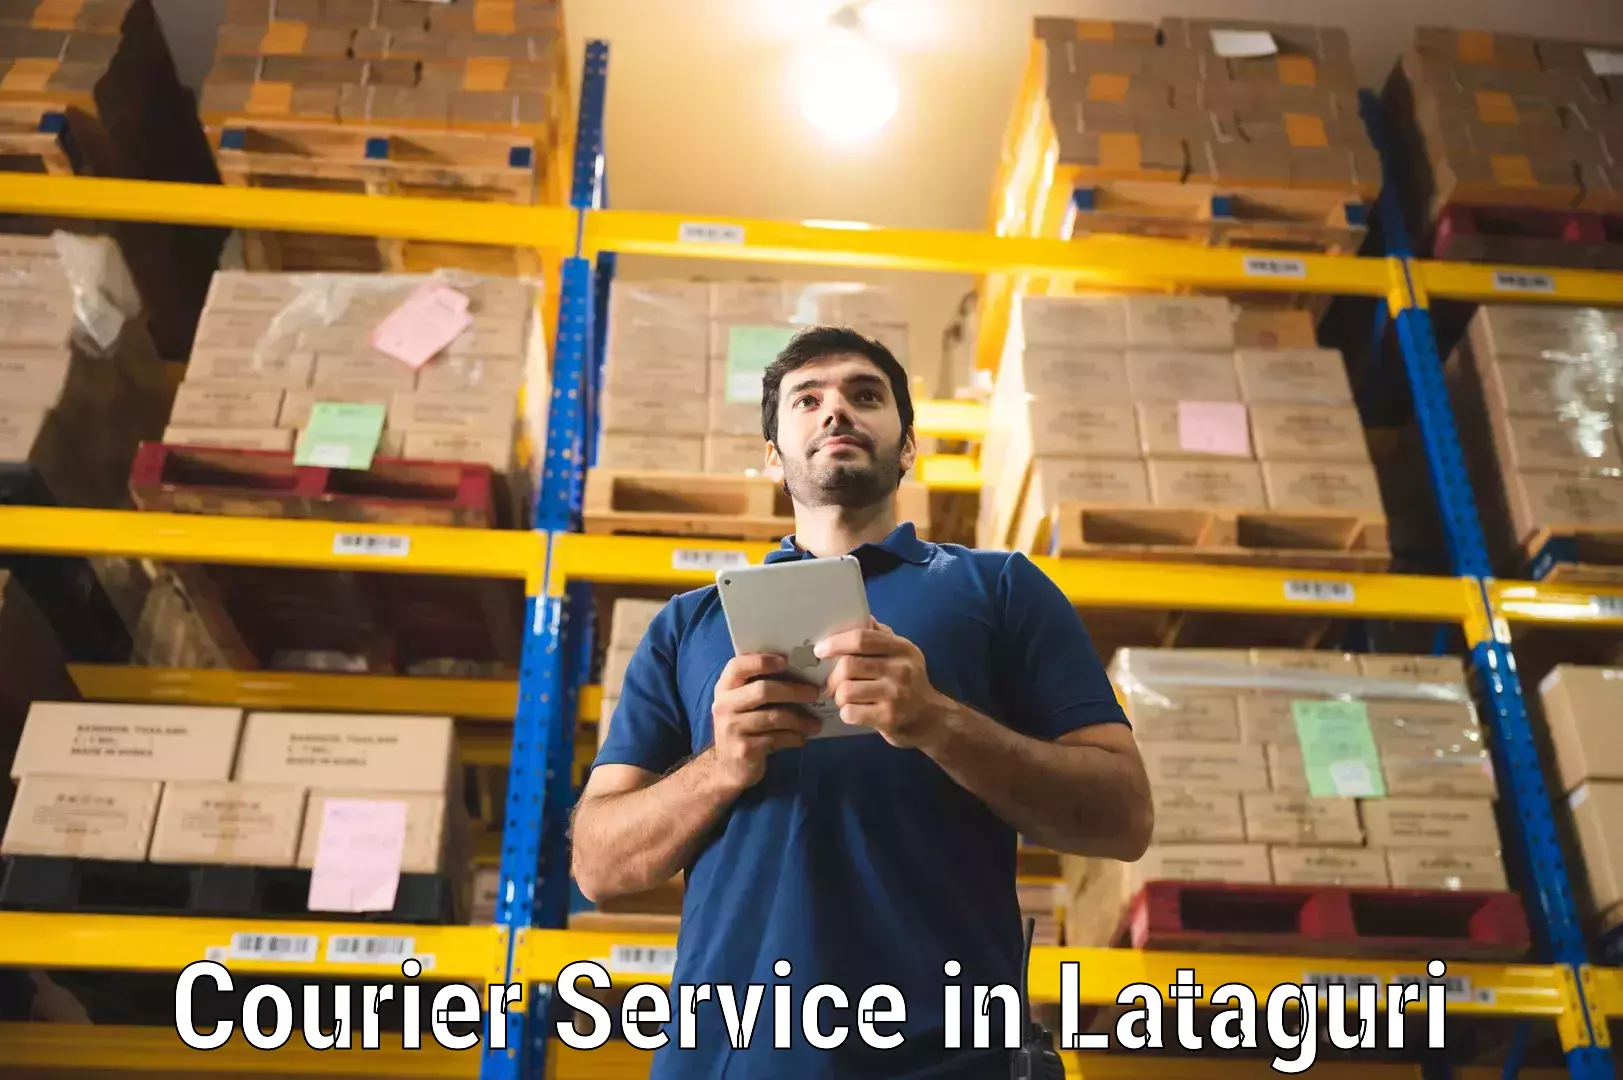 Courier service efficiency in Lataguri